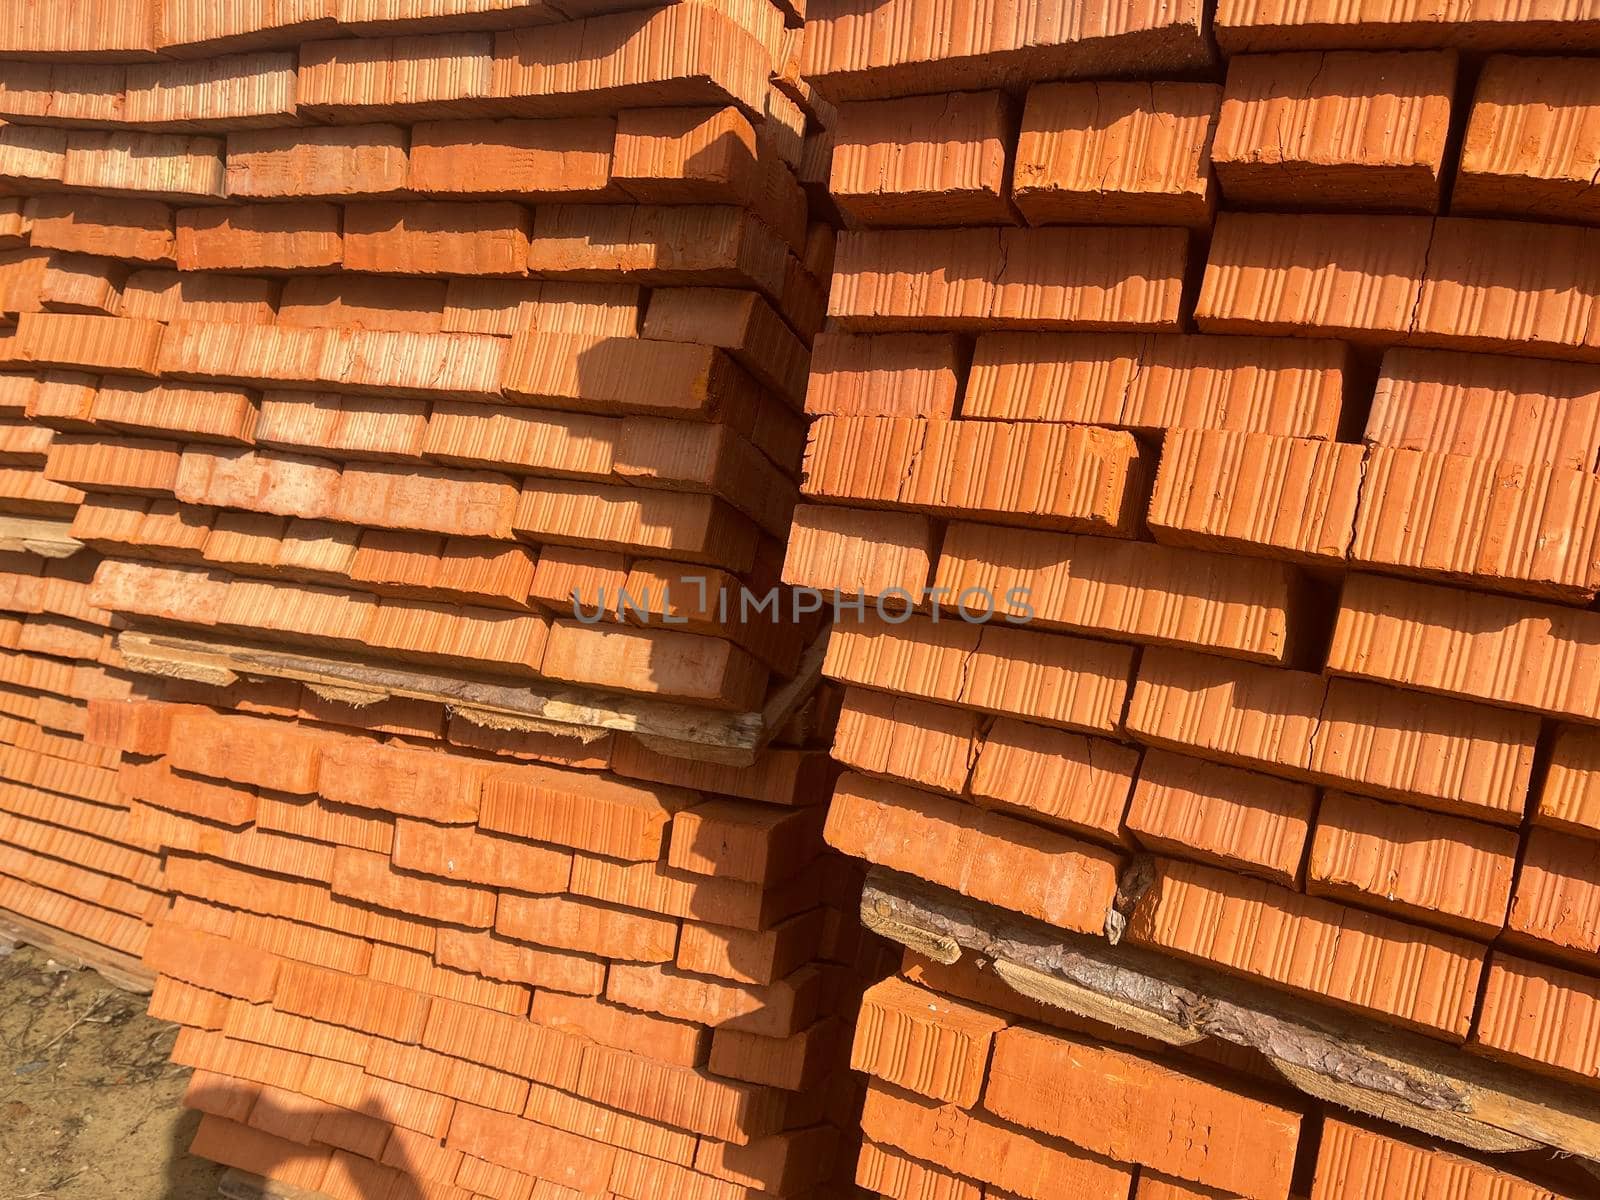 Pile of pallets with red bricks on city street. Building materials on construction site outdoor. Concept of constructing buildings. by epidemiks